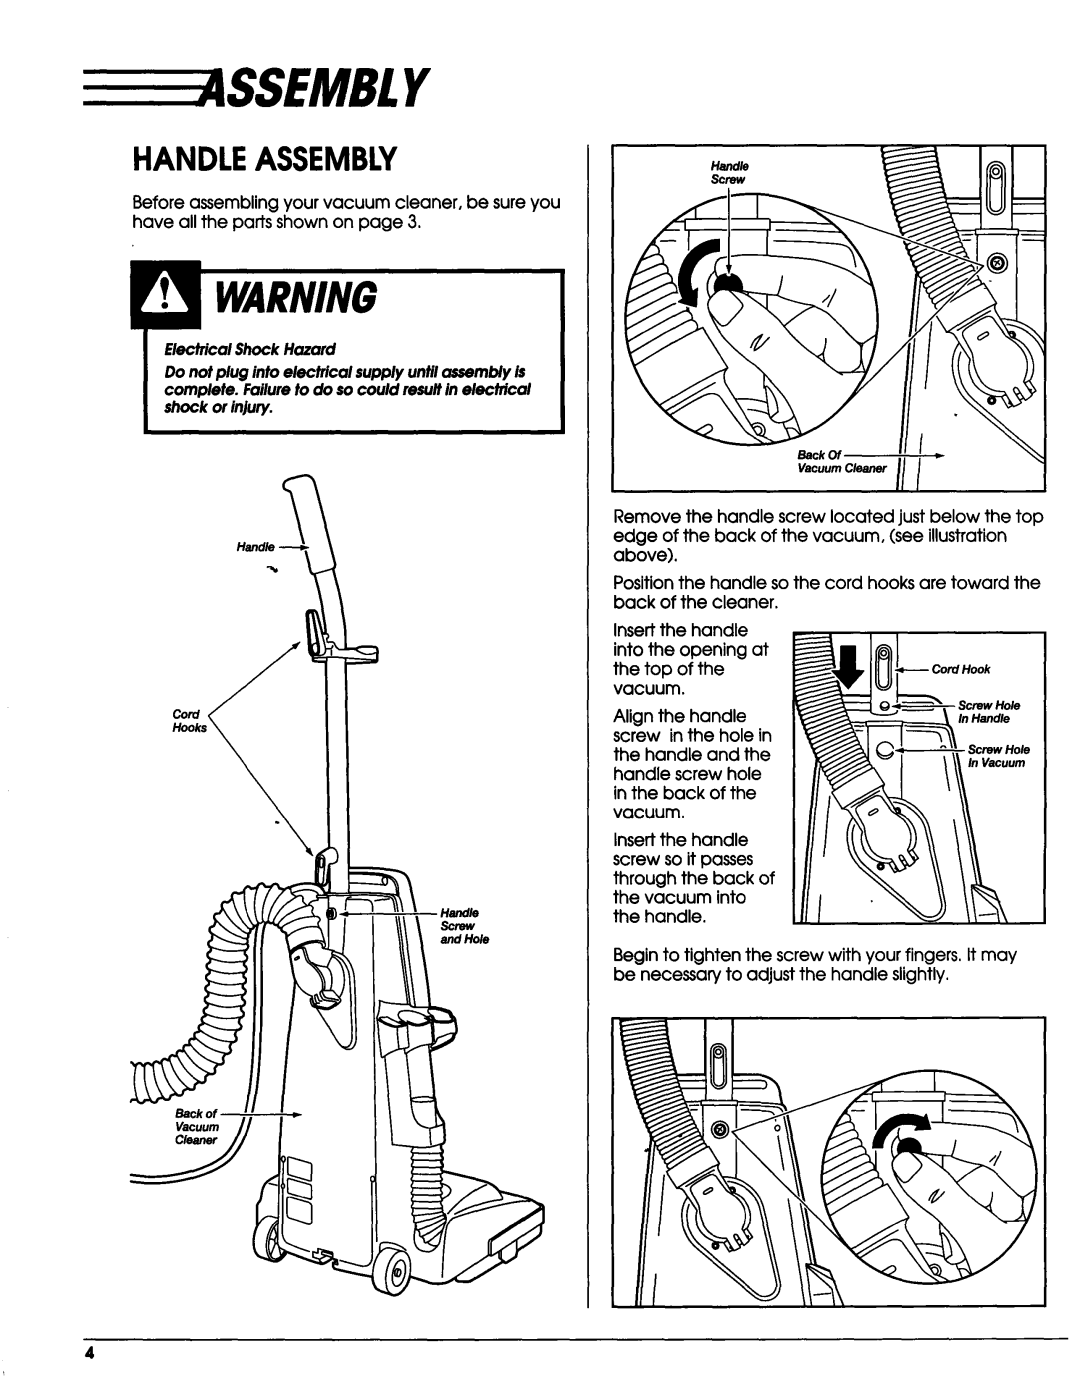 Sears Vacuum Cleaner owner manual Handleassembly, v-uumI ll, ElectricalShock Hazard, handle screw hole in the back of the 